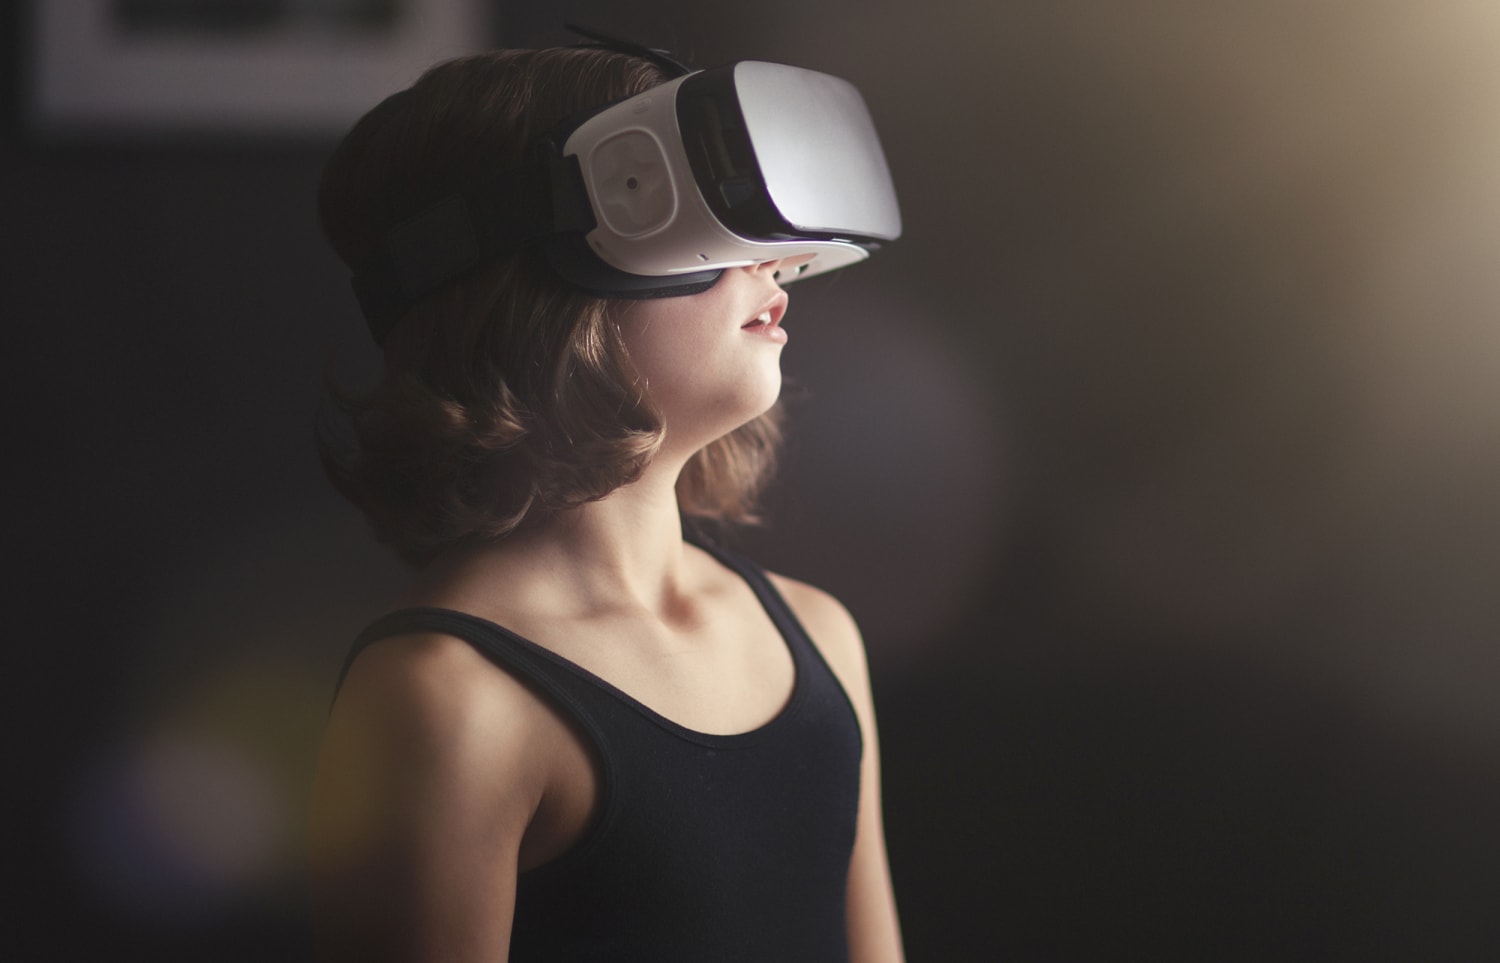 Dangers Of Virtual Reality For Young Children